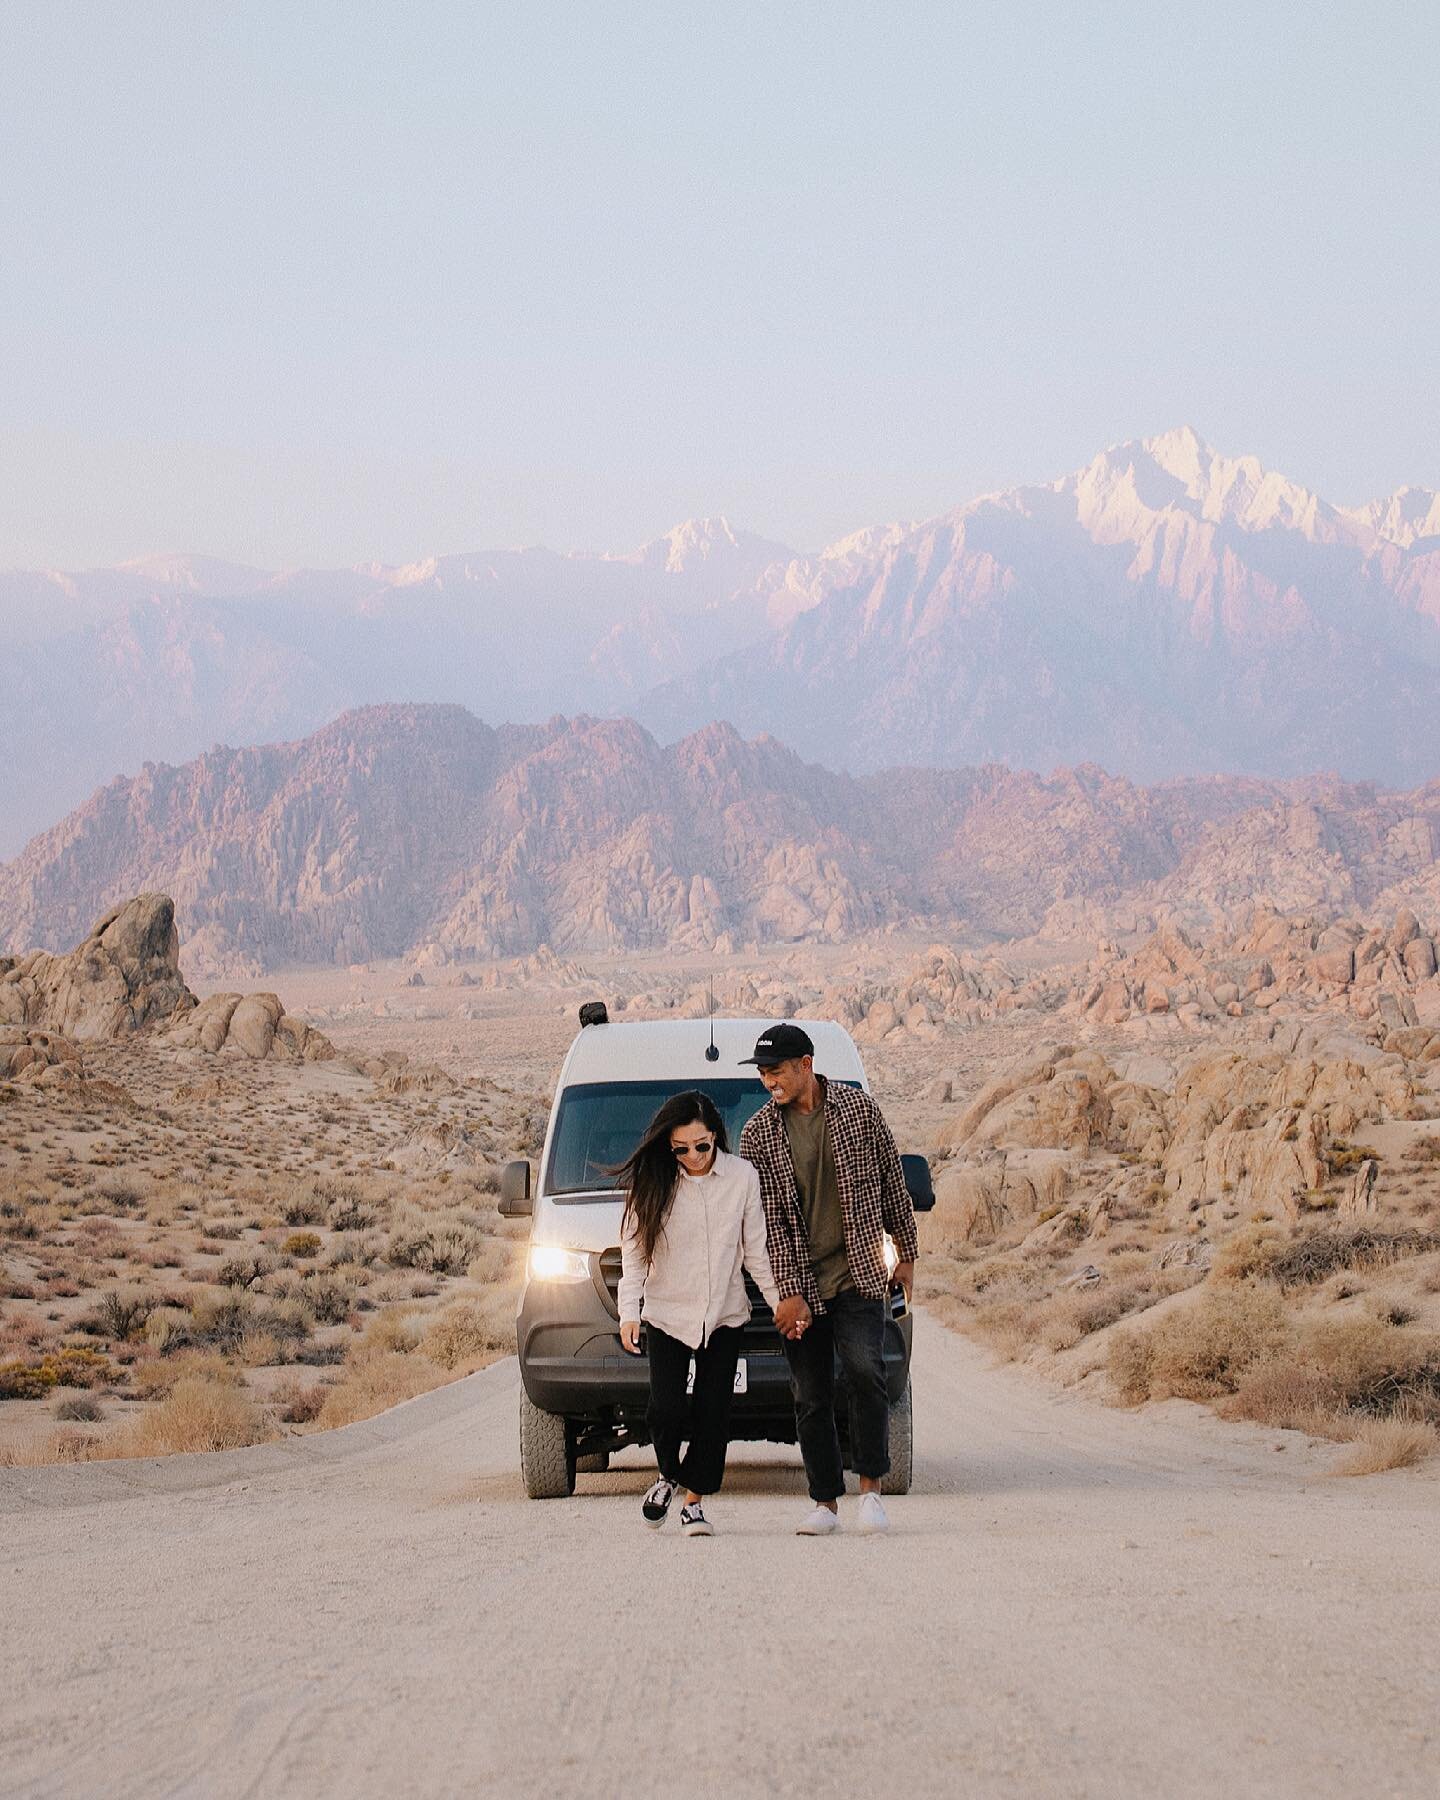 Missing our elopement road trip in the @my_roadventures van! It was extremely smoky from the fires during our trip but we still made the most out of it!